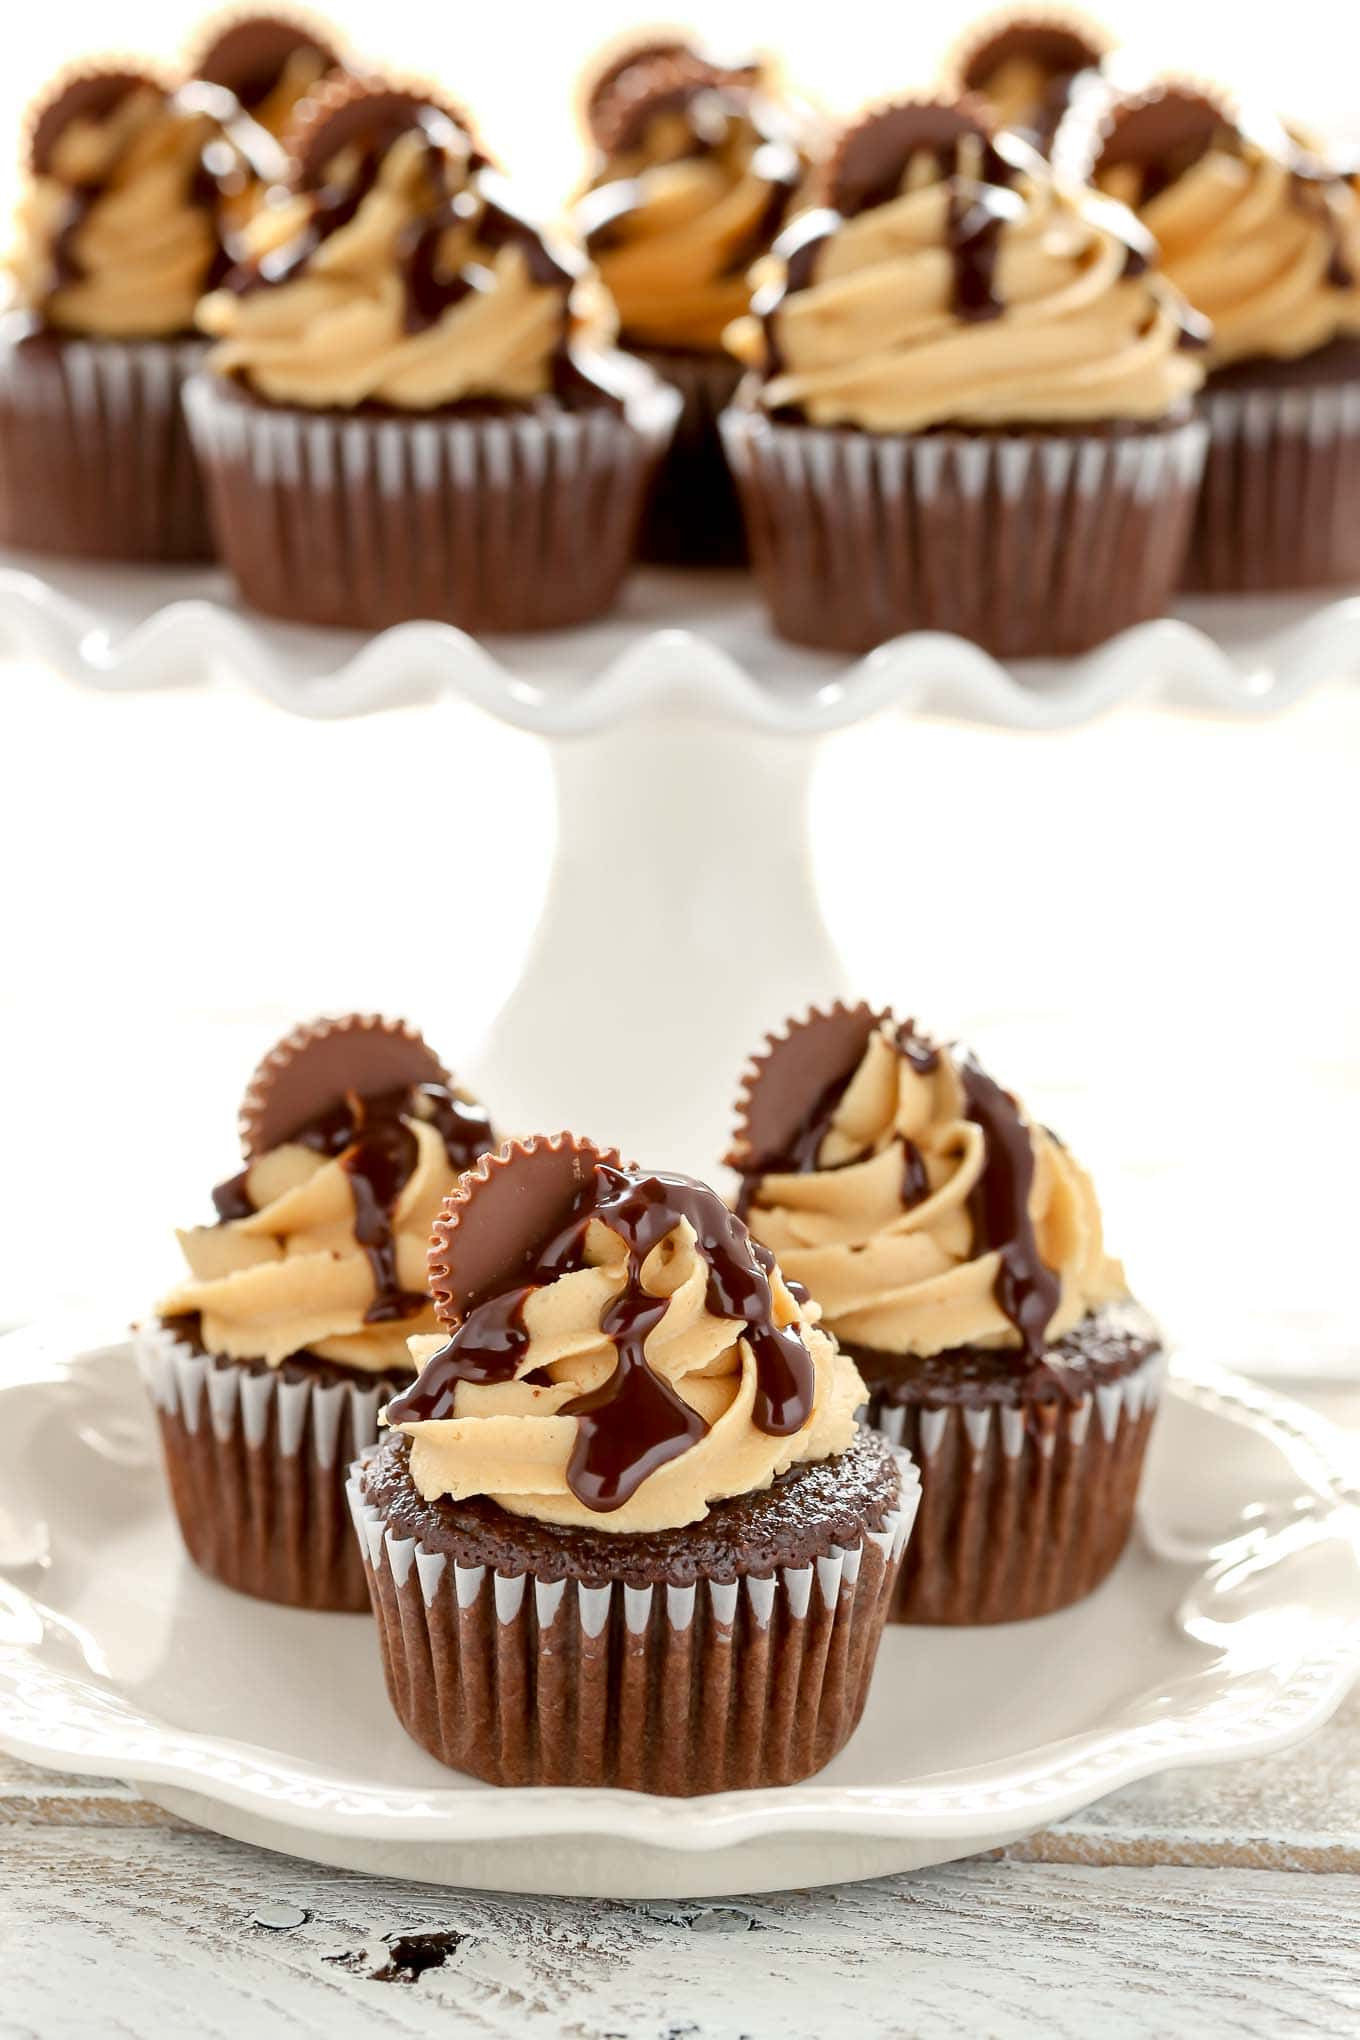 Chocolate Cupcakes With Peanut Butter Frosting
 Chocolate Cupcakes with Peanut Butter Frosting